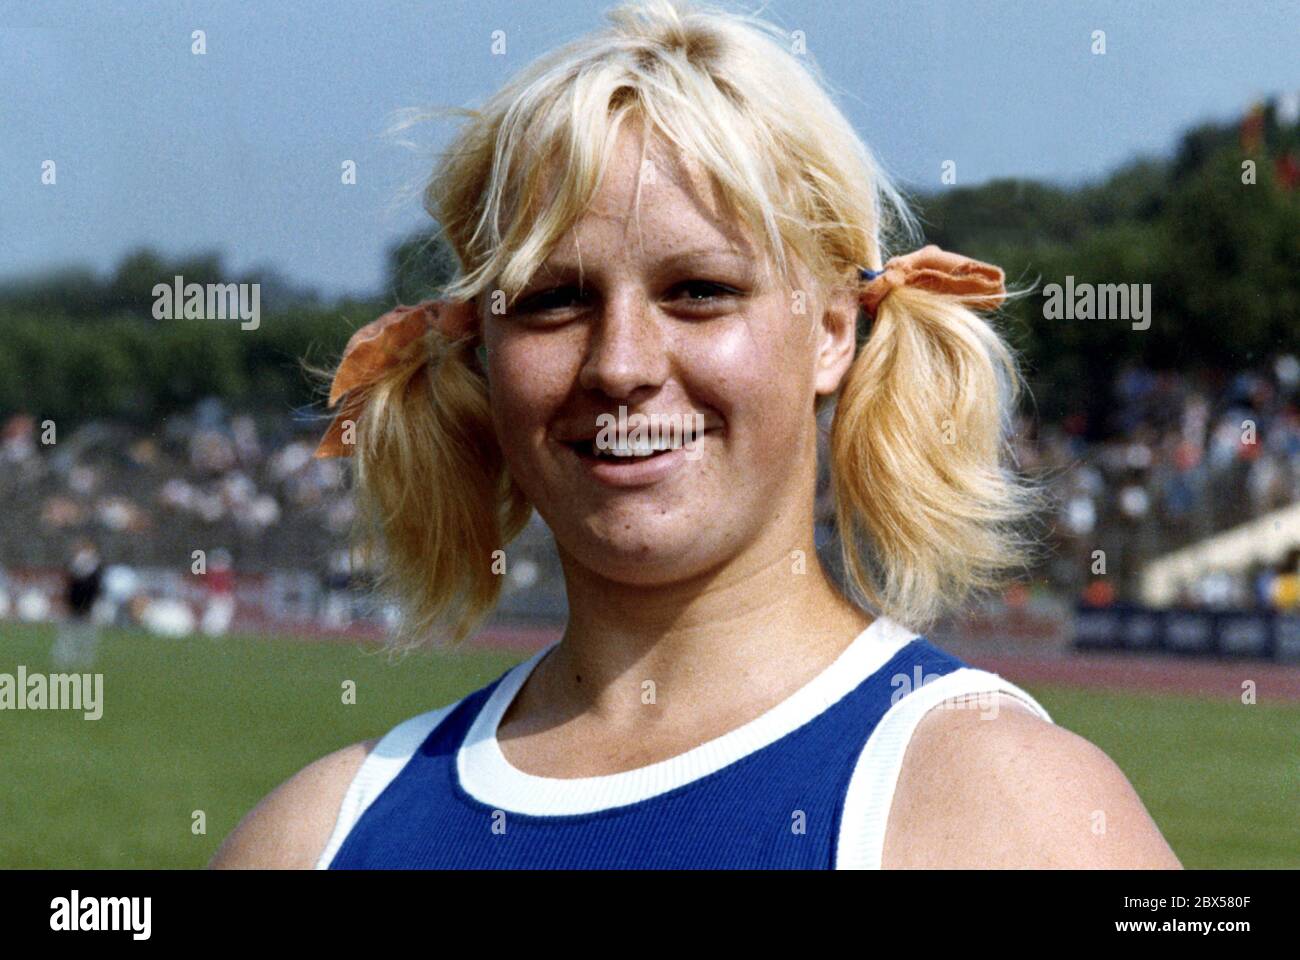 Ilona Slupianek, born Schoknecht in 24.09.1956. An East German athlete, Olympic champion at the Olympics 1980 in Moscow in women's shot put. In 1977 she was tested positive for doping and was locked for a year as the first East German sportswoman. Between 1976-1986 Representative of the Volkskammer. Portrait photo from 1973 as the winner in shot put at the European Junior Championships in Duisburg. Stock Photo